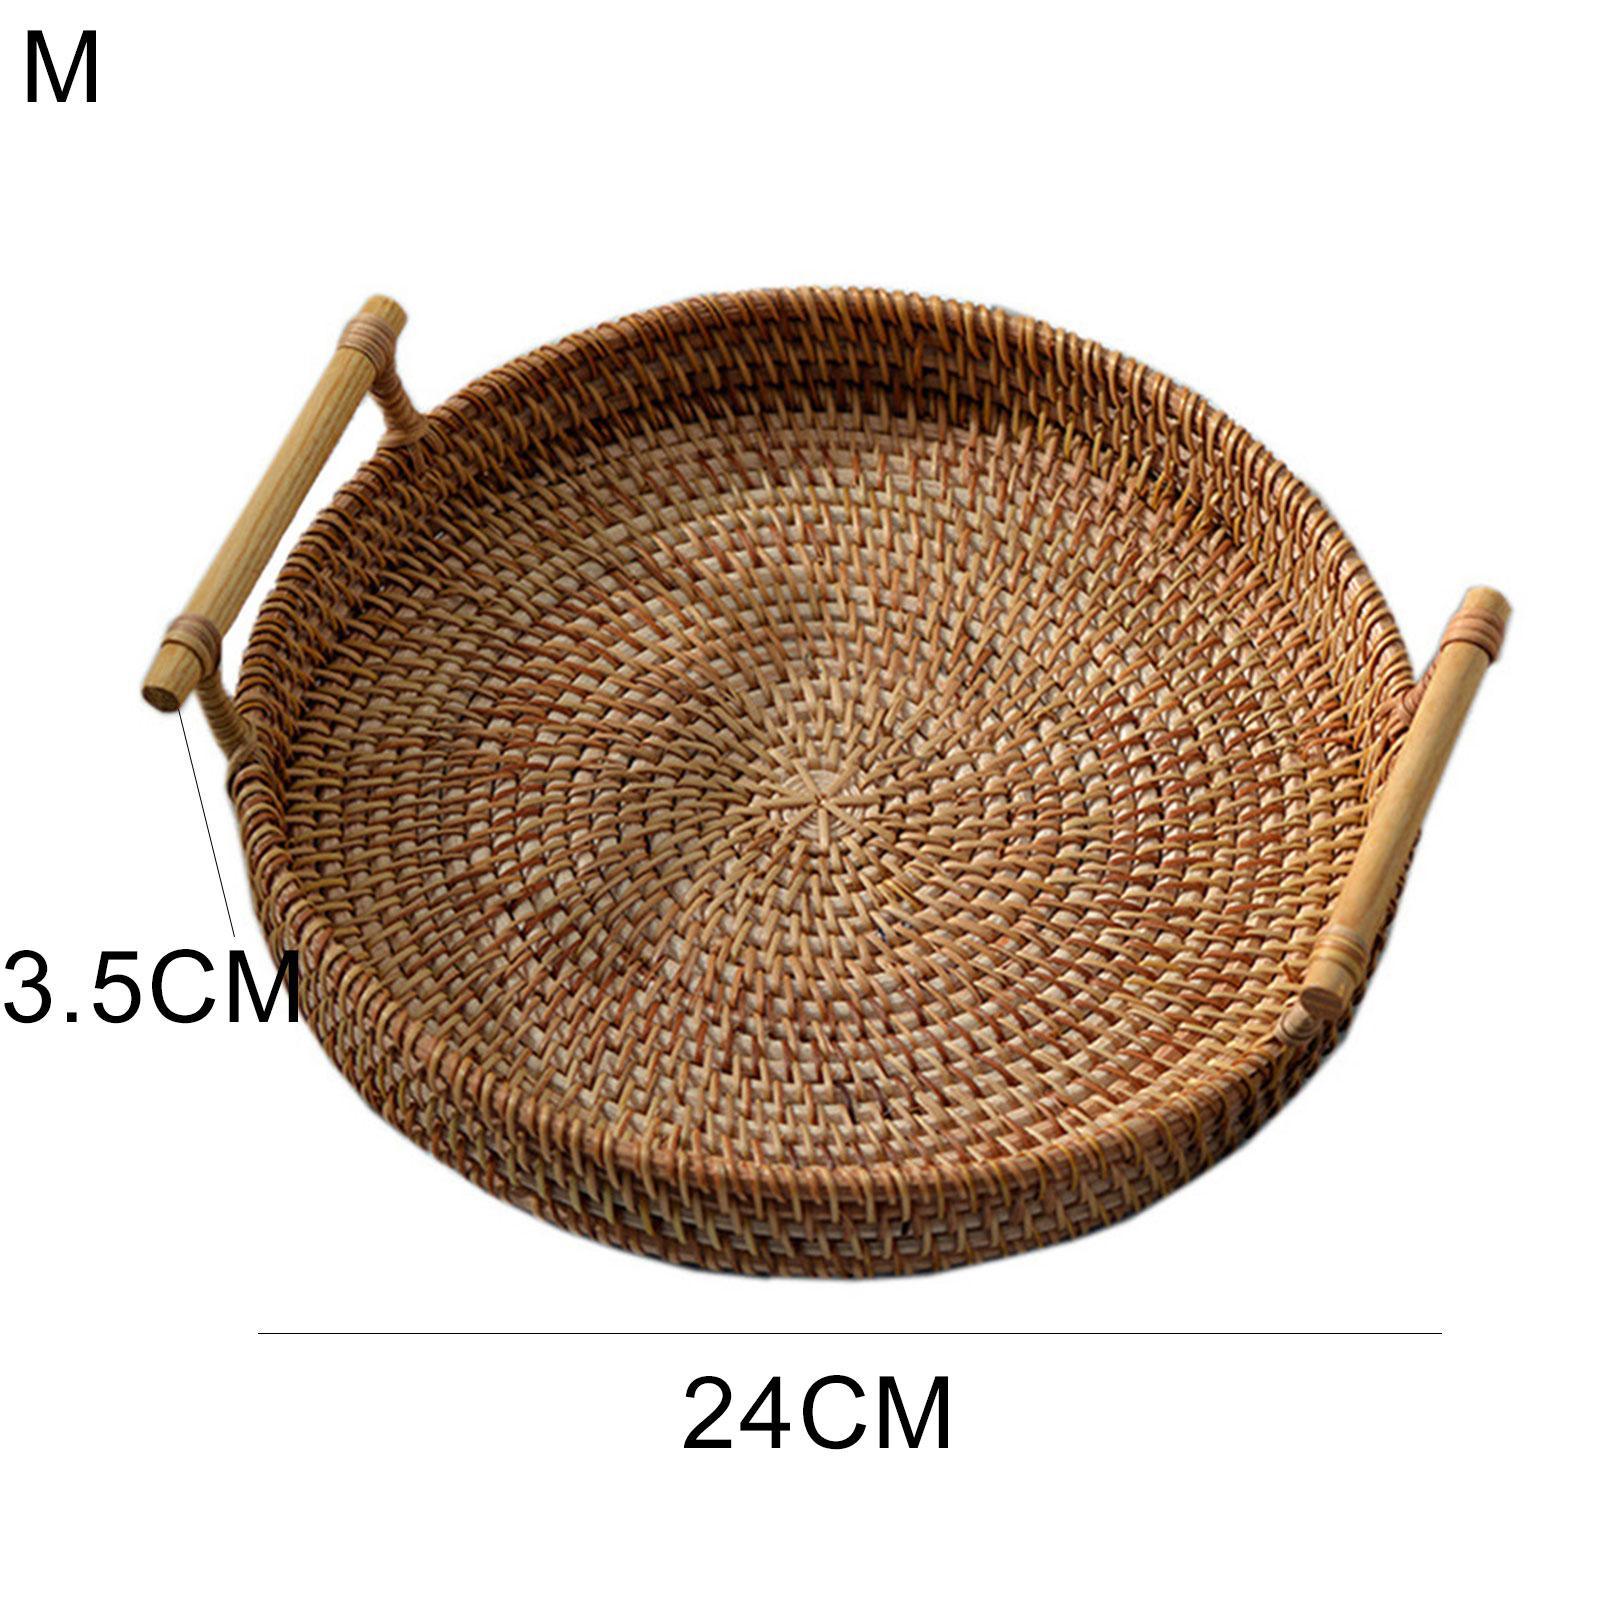 Handwoven Rattan Tray With Wooden Handles